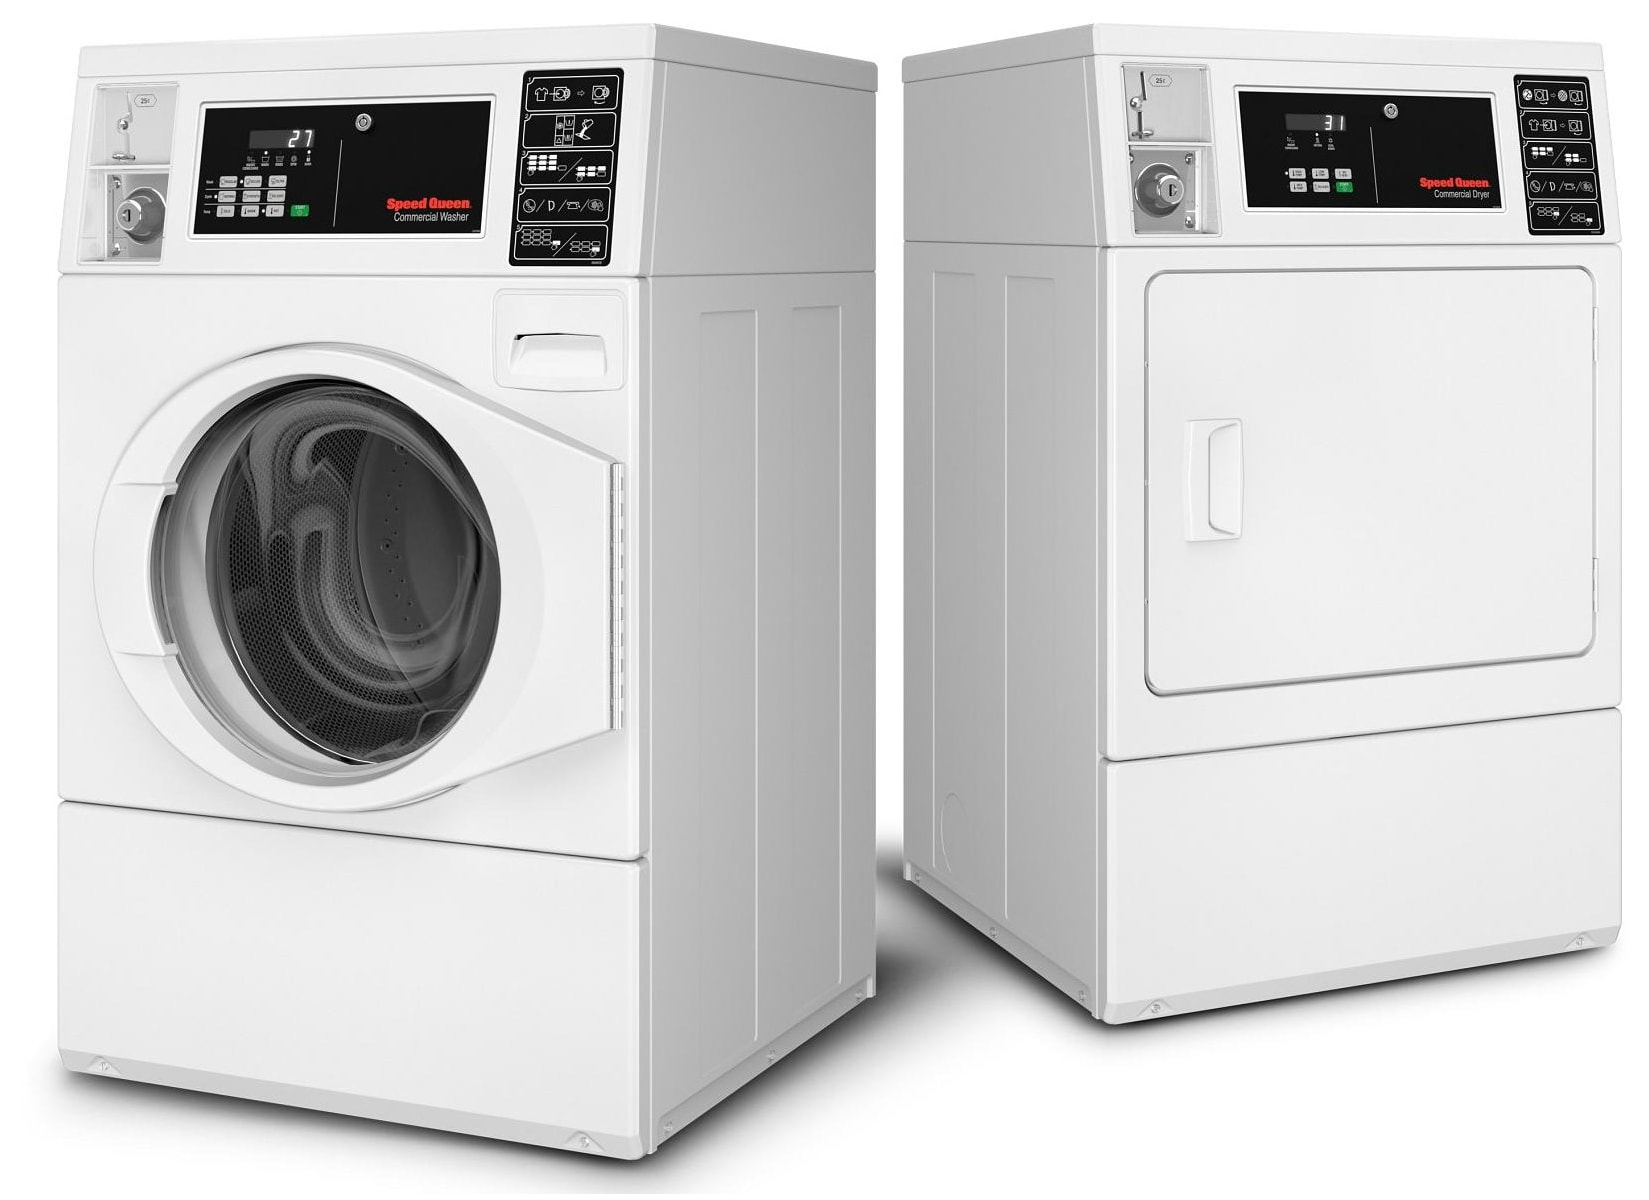 Speed Queen TV6000WN Commercial Topload Washer - White